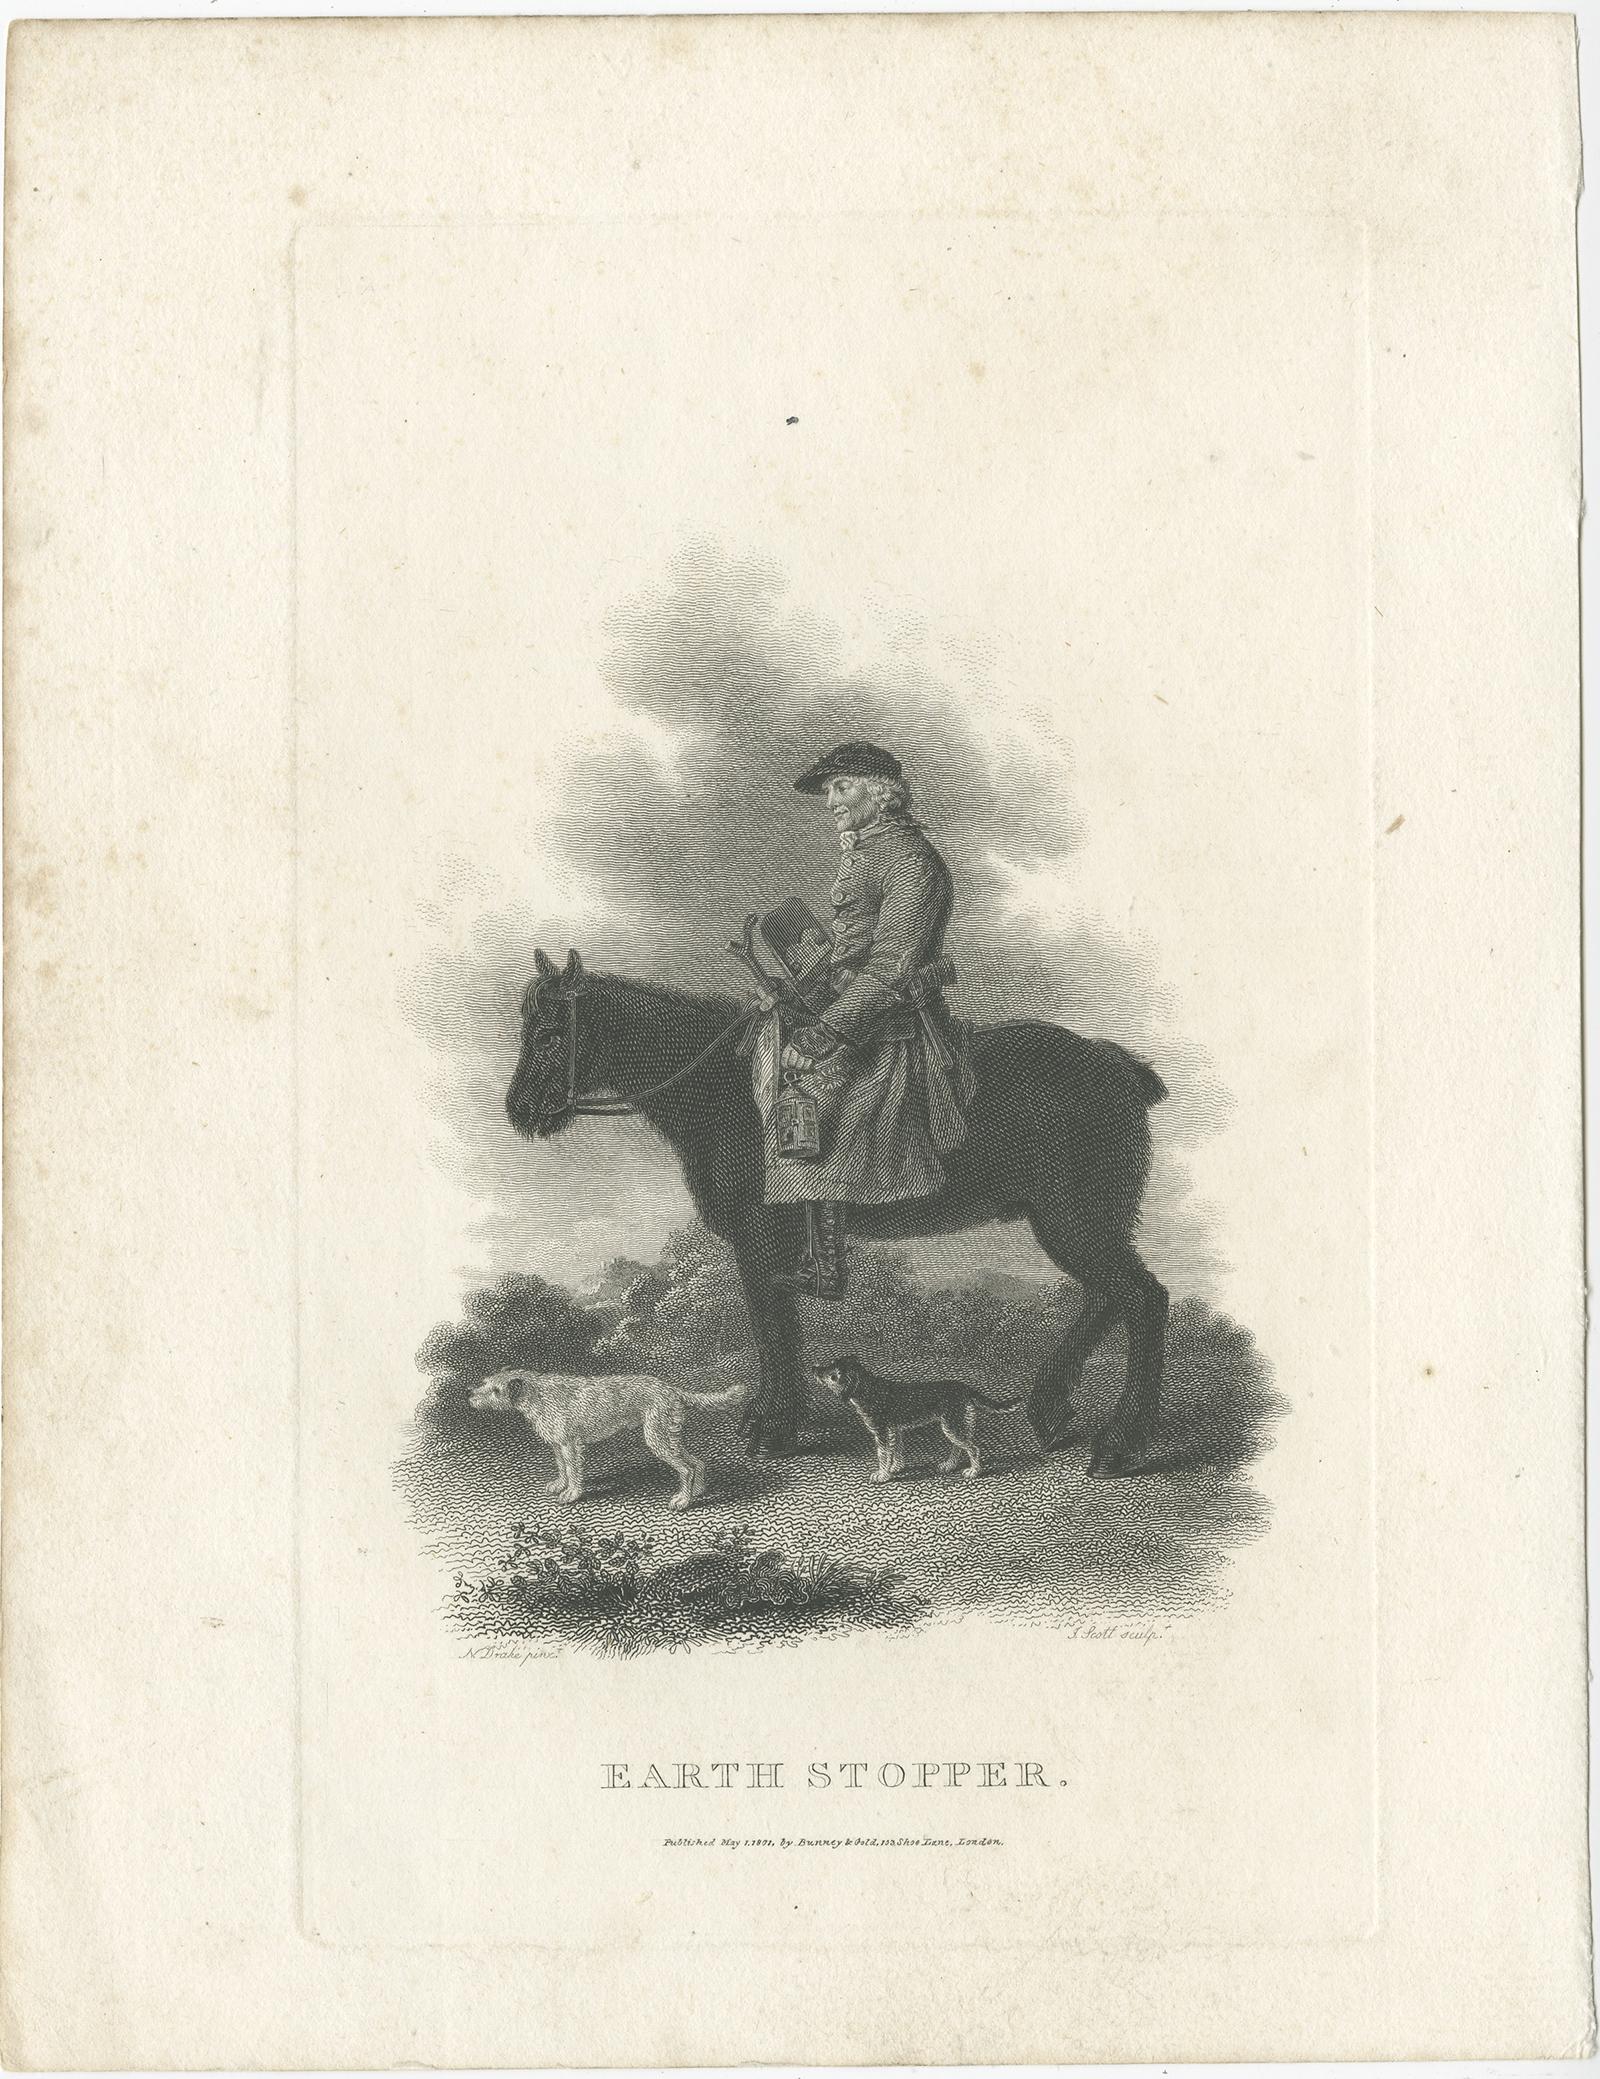 Antique print titled 'Earth Stopper'. 

This print was created in 1801 in London for William Barker Daniel's work on British rural sports. An Earth Stopper is one that stops up fox holes prior to a hunt. 

Artists and Engravers: Author: William